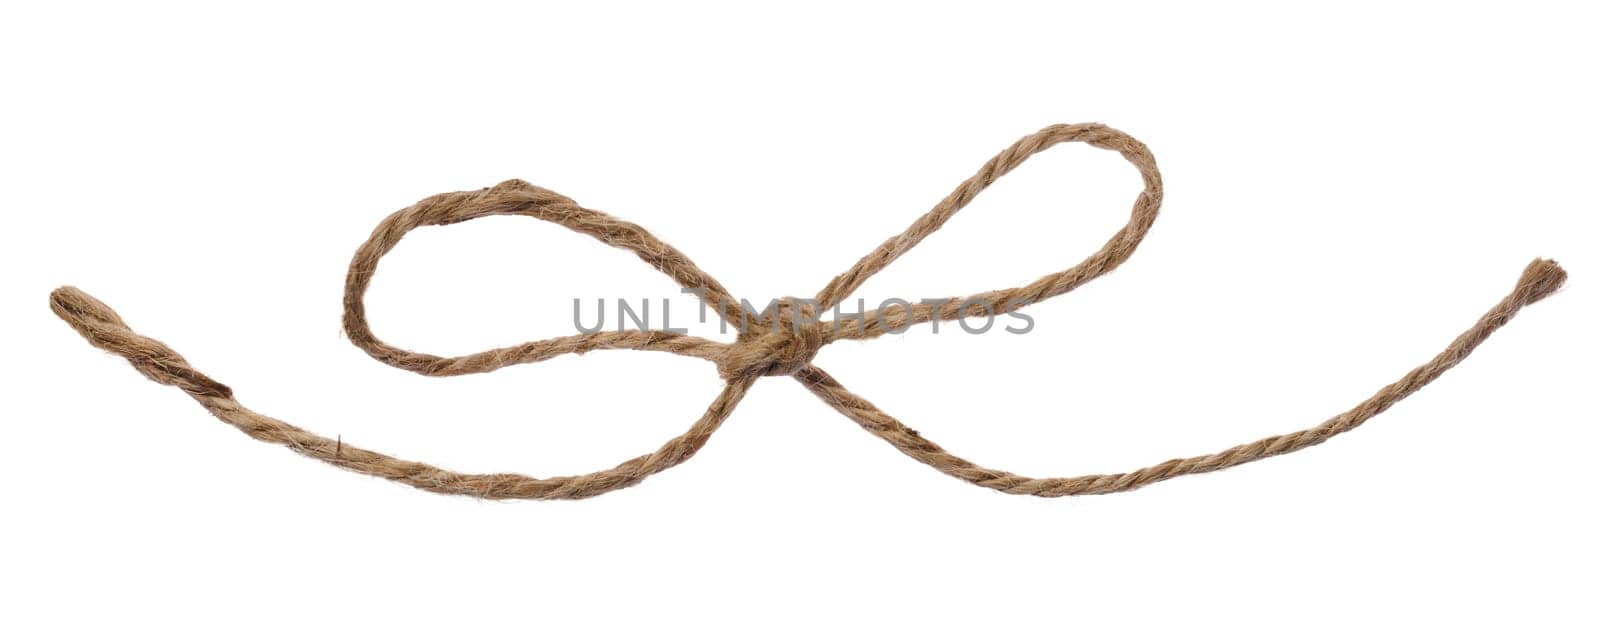 Knotted brown jute rope bow, wrapping material